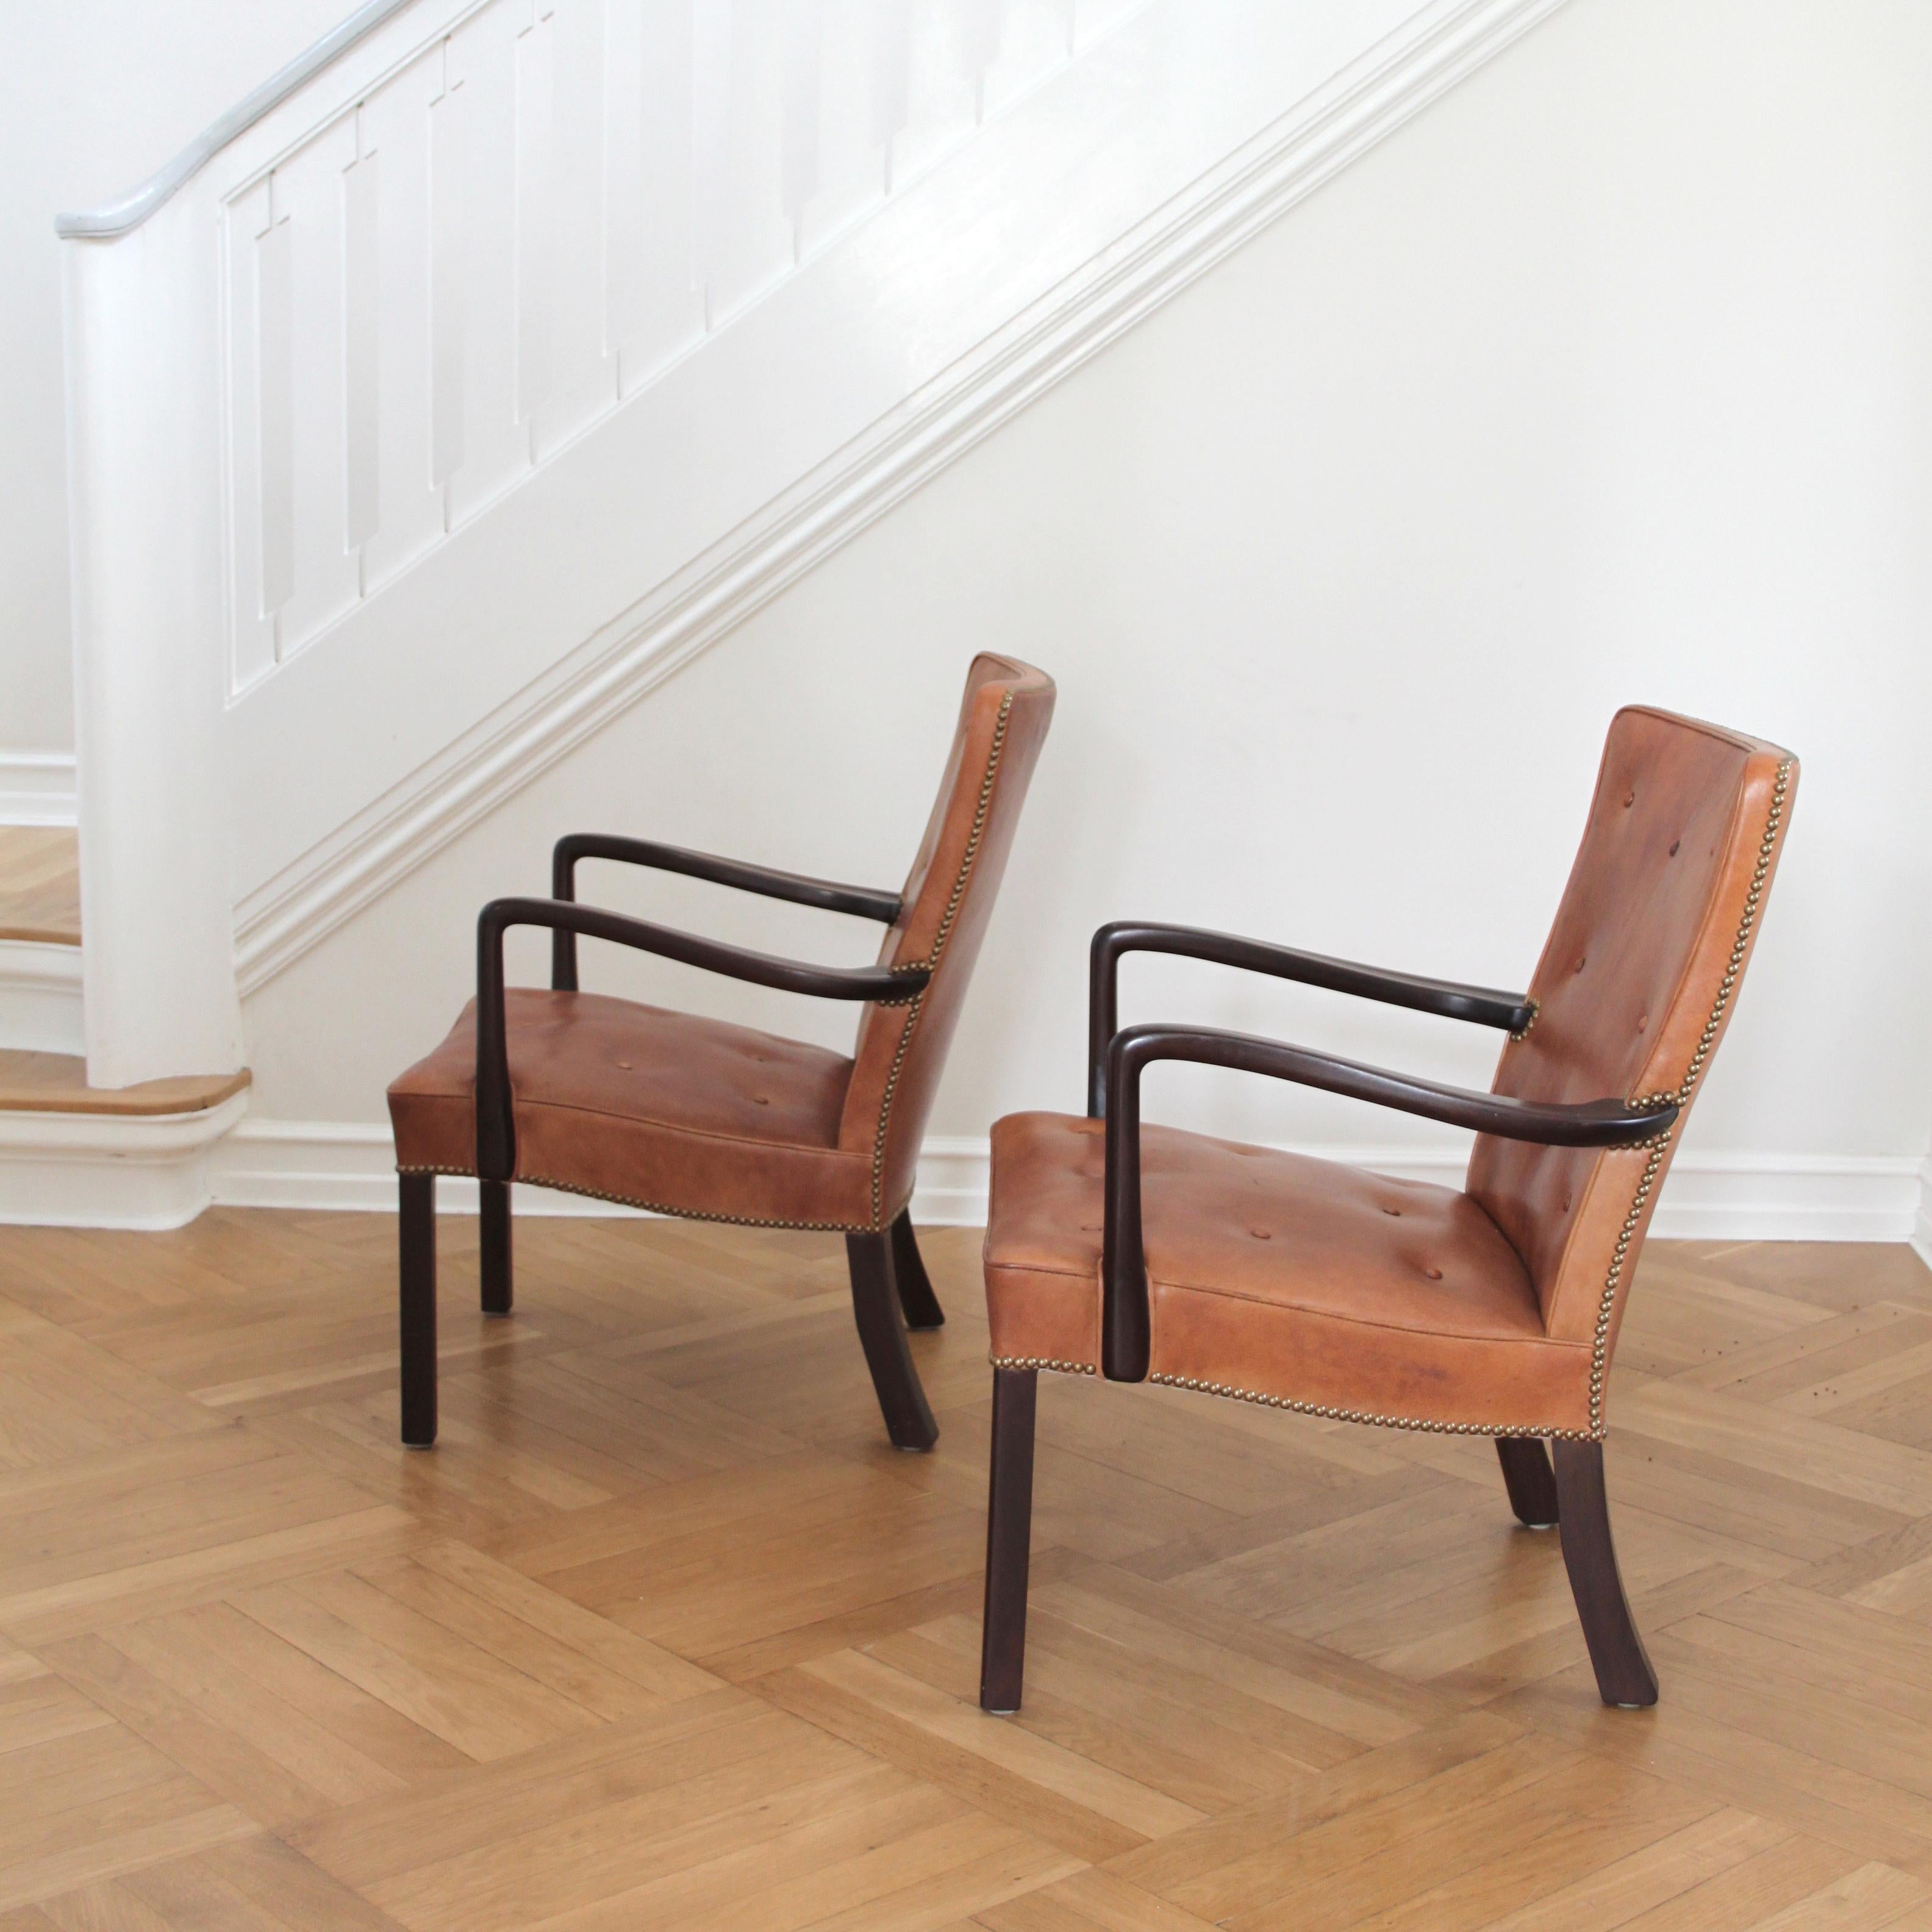 Mid-Century Modern Pair of Jacob Kjær Lounge Chairs in Dark Stained Mahogany and Niger Leather